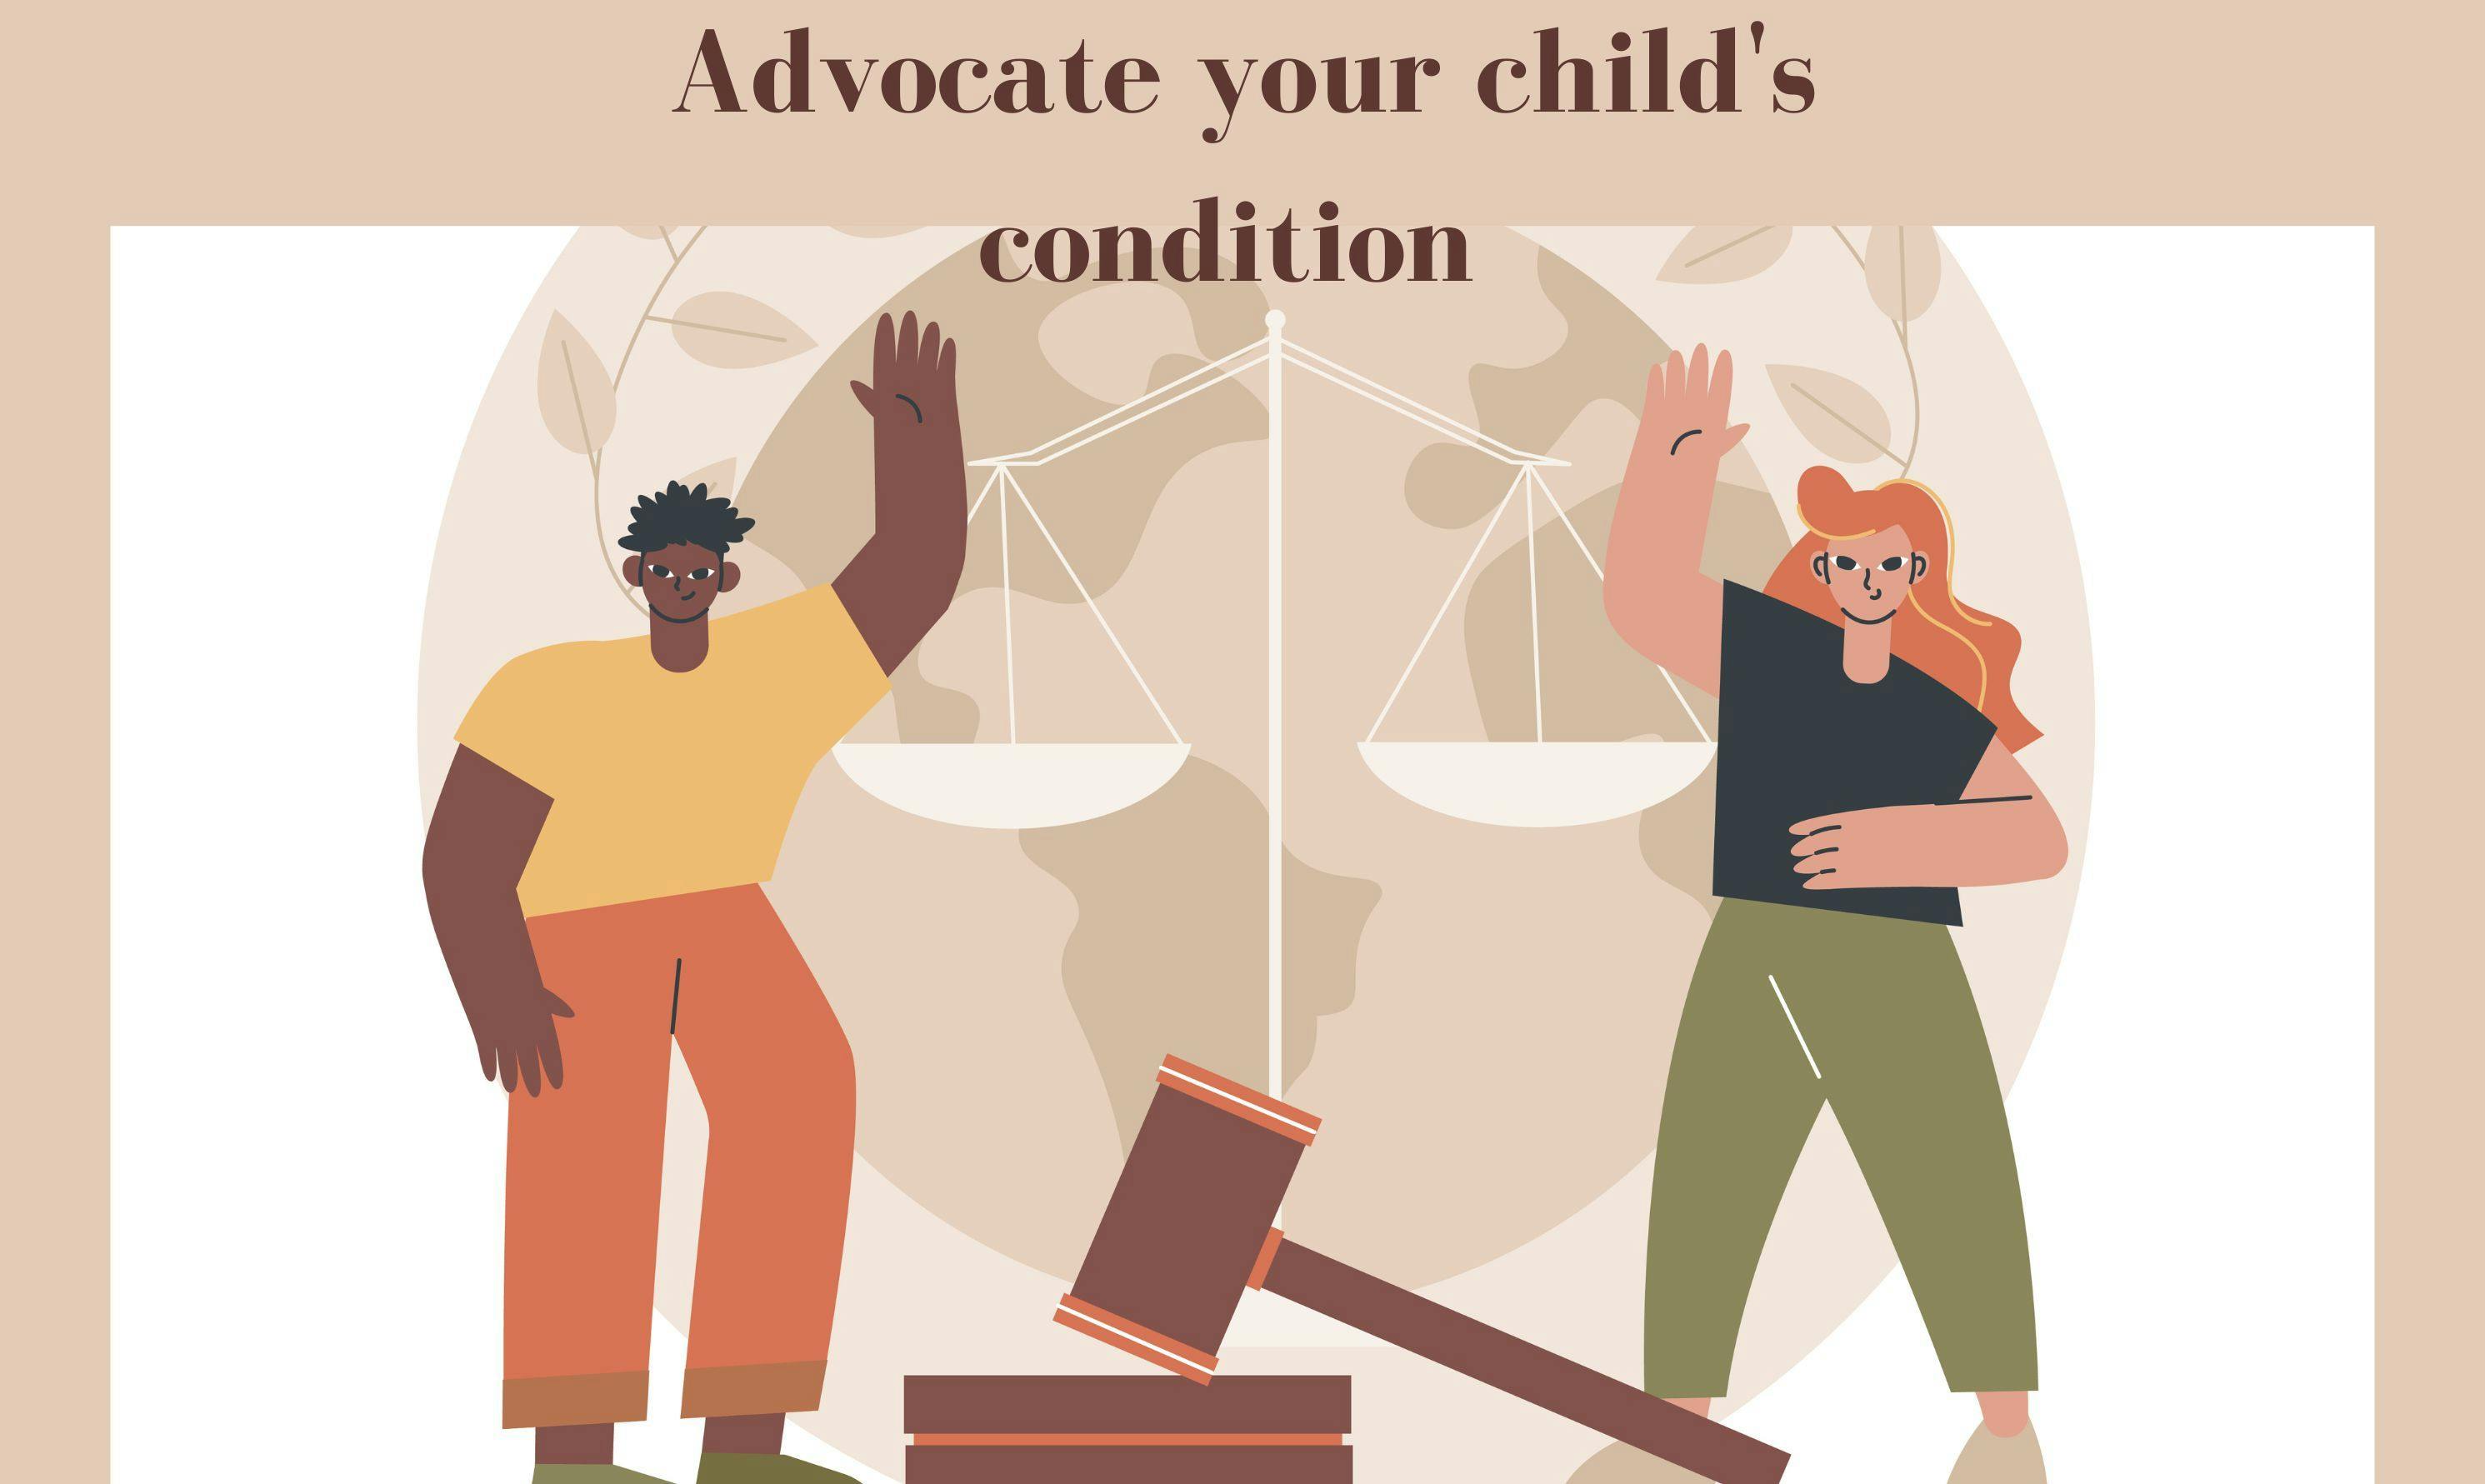 Helping parents advocate for their child's condition